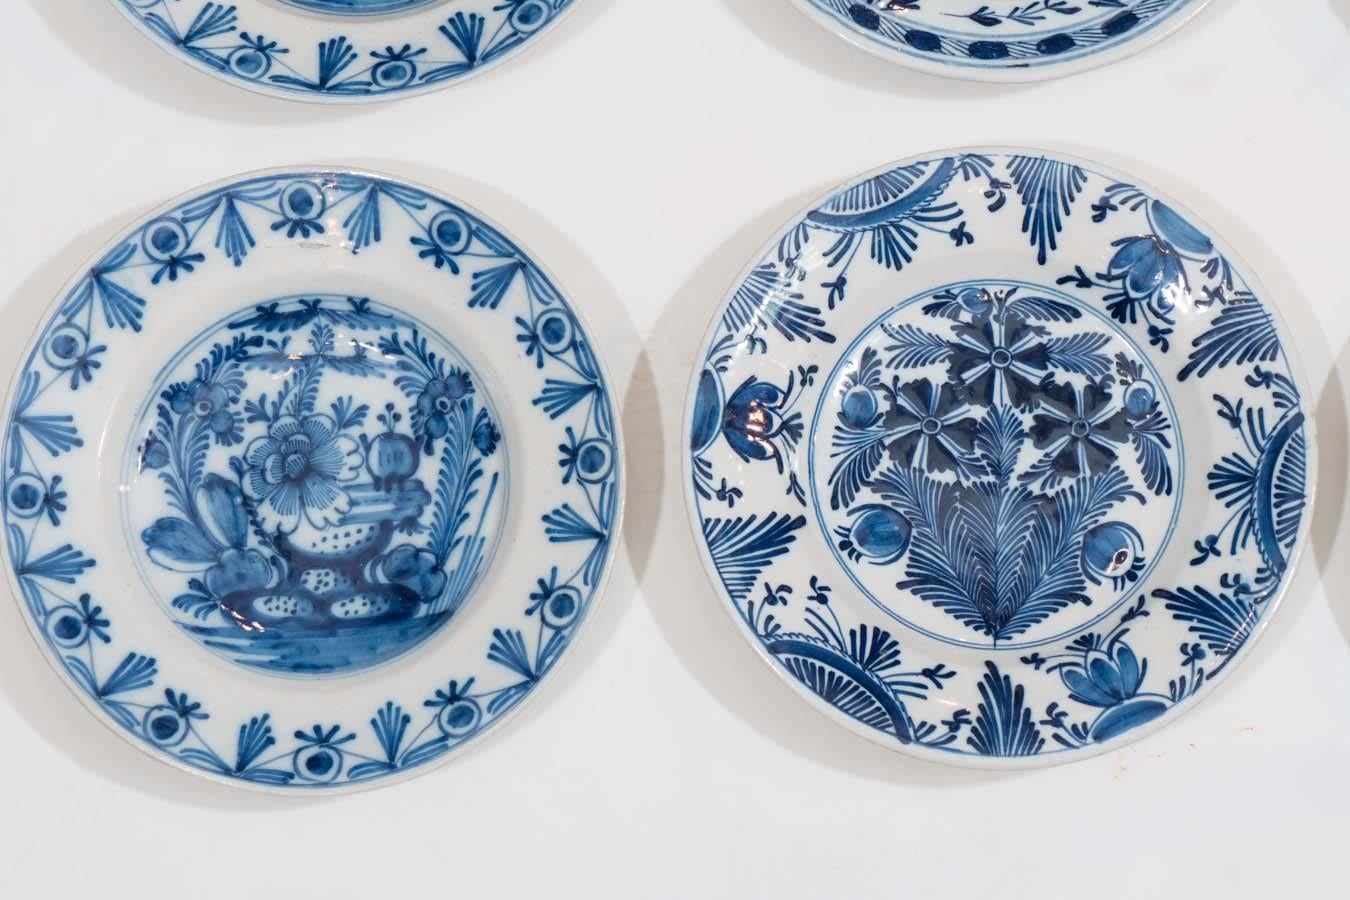 Shown here are nine antique Dutch Delft dishes from our large collection of antique blue and white delft. These dishes would look great in a cabinet, placed on a table, or hung on a wall. In the shop we have a large selection of antique 18th and